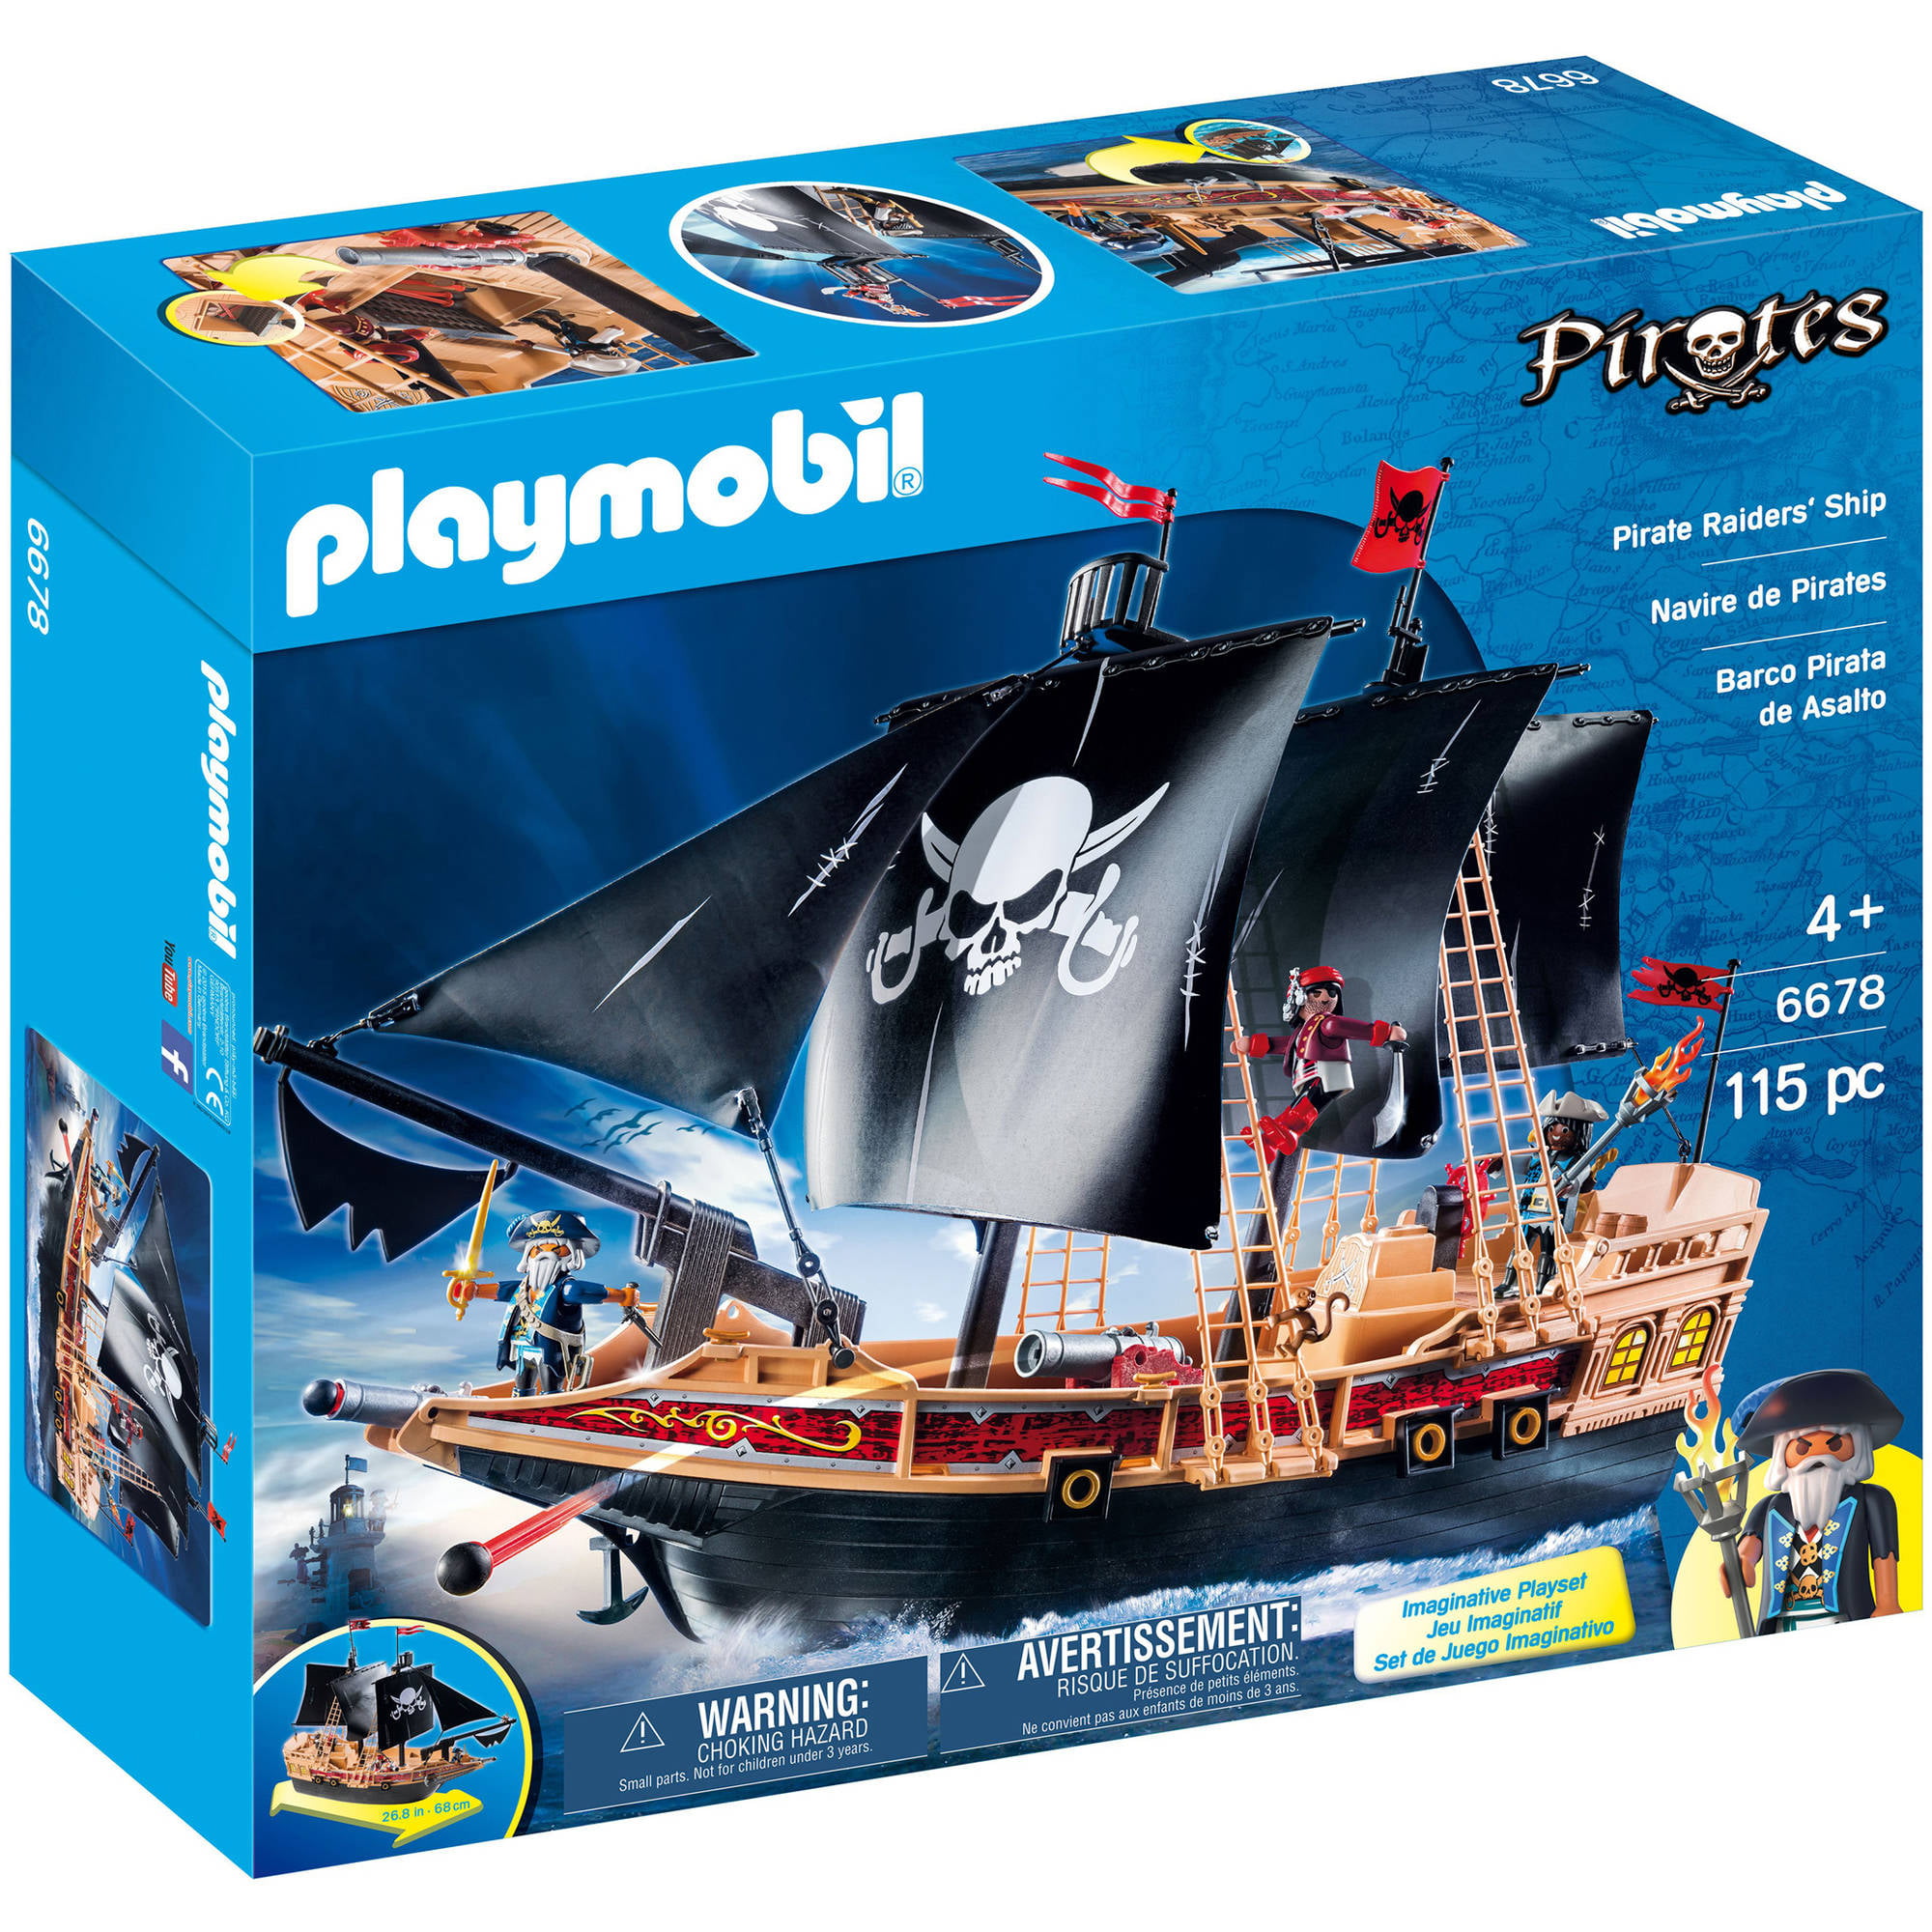 large boulet for canon boats & soldiers 3111 3133 a2226 Playmobil pirate 